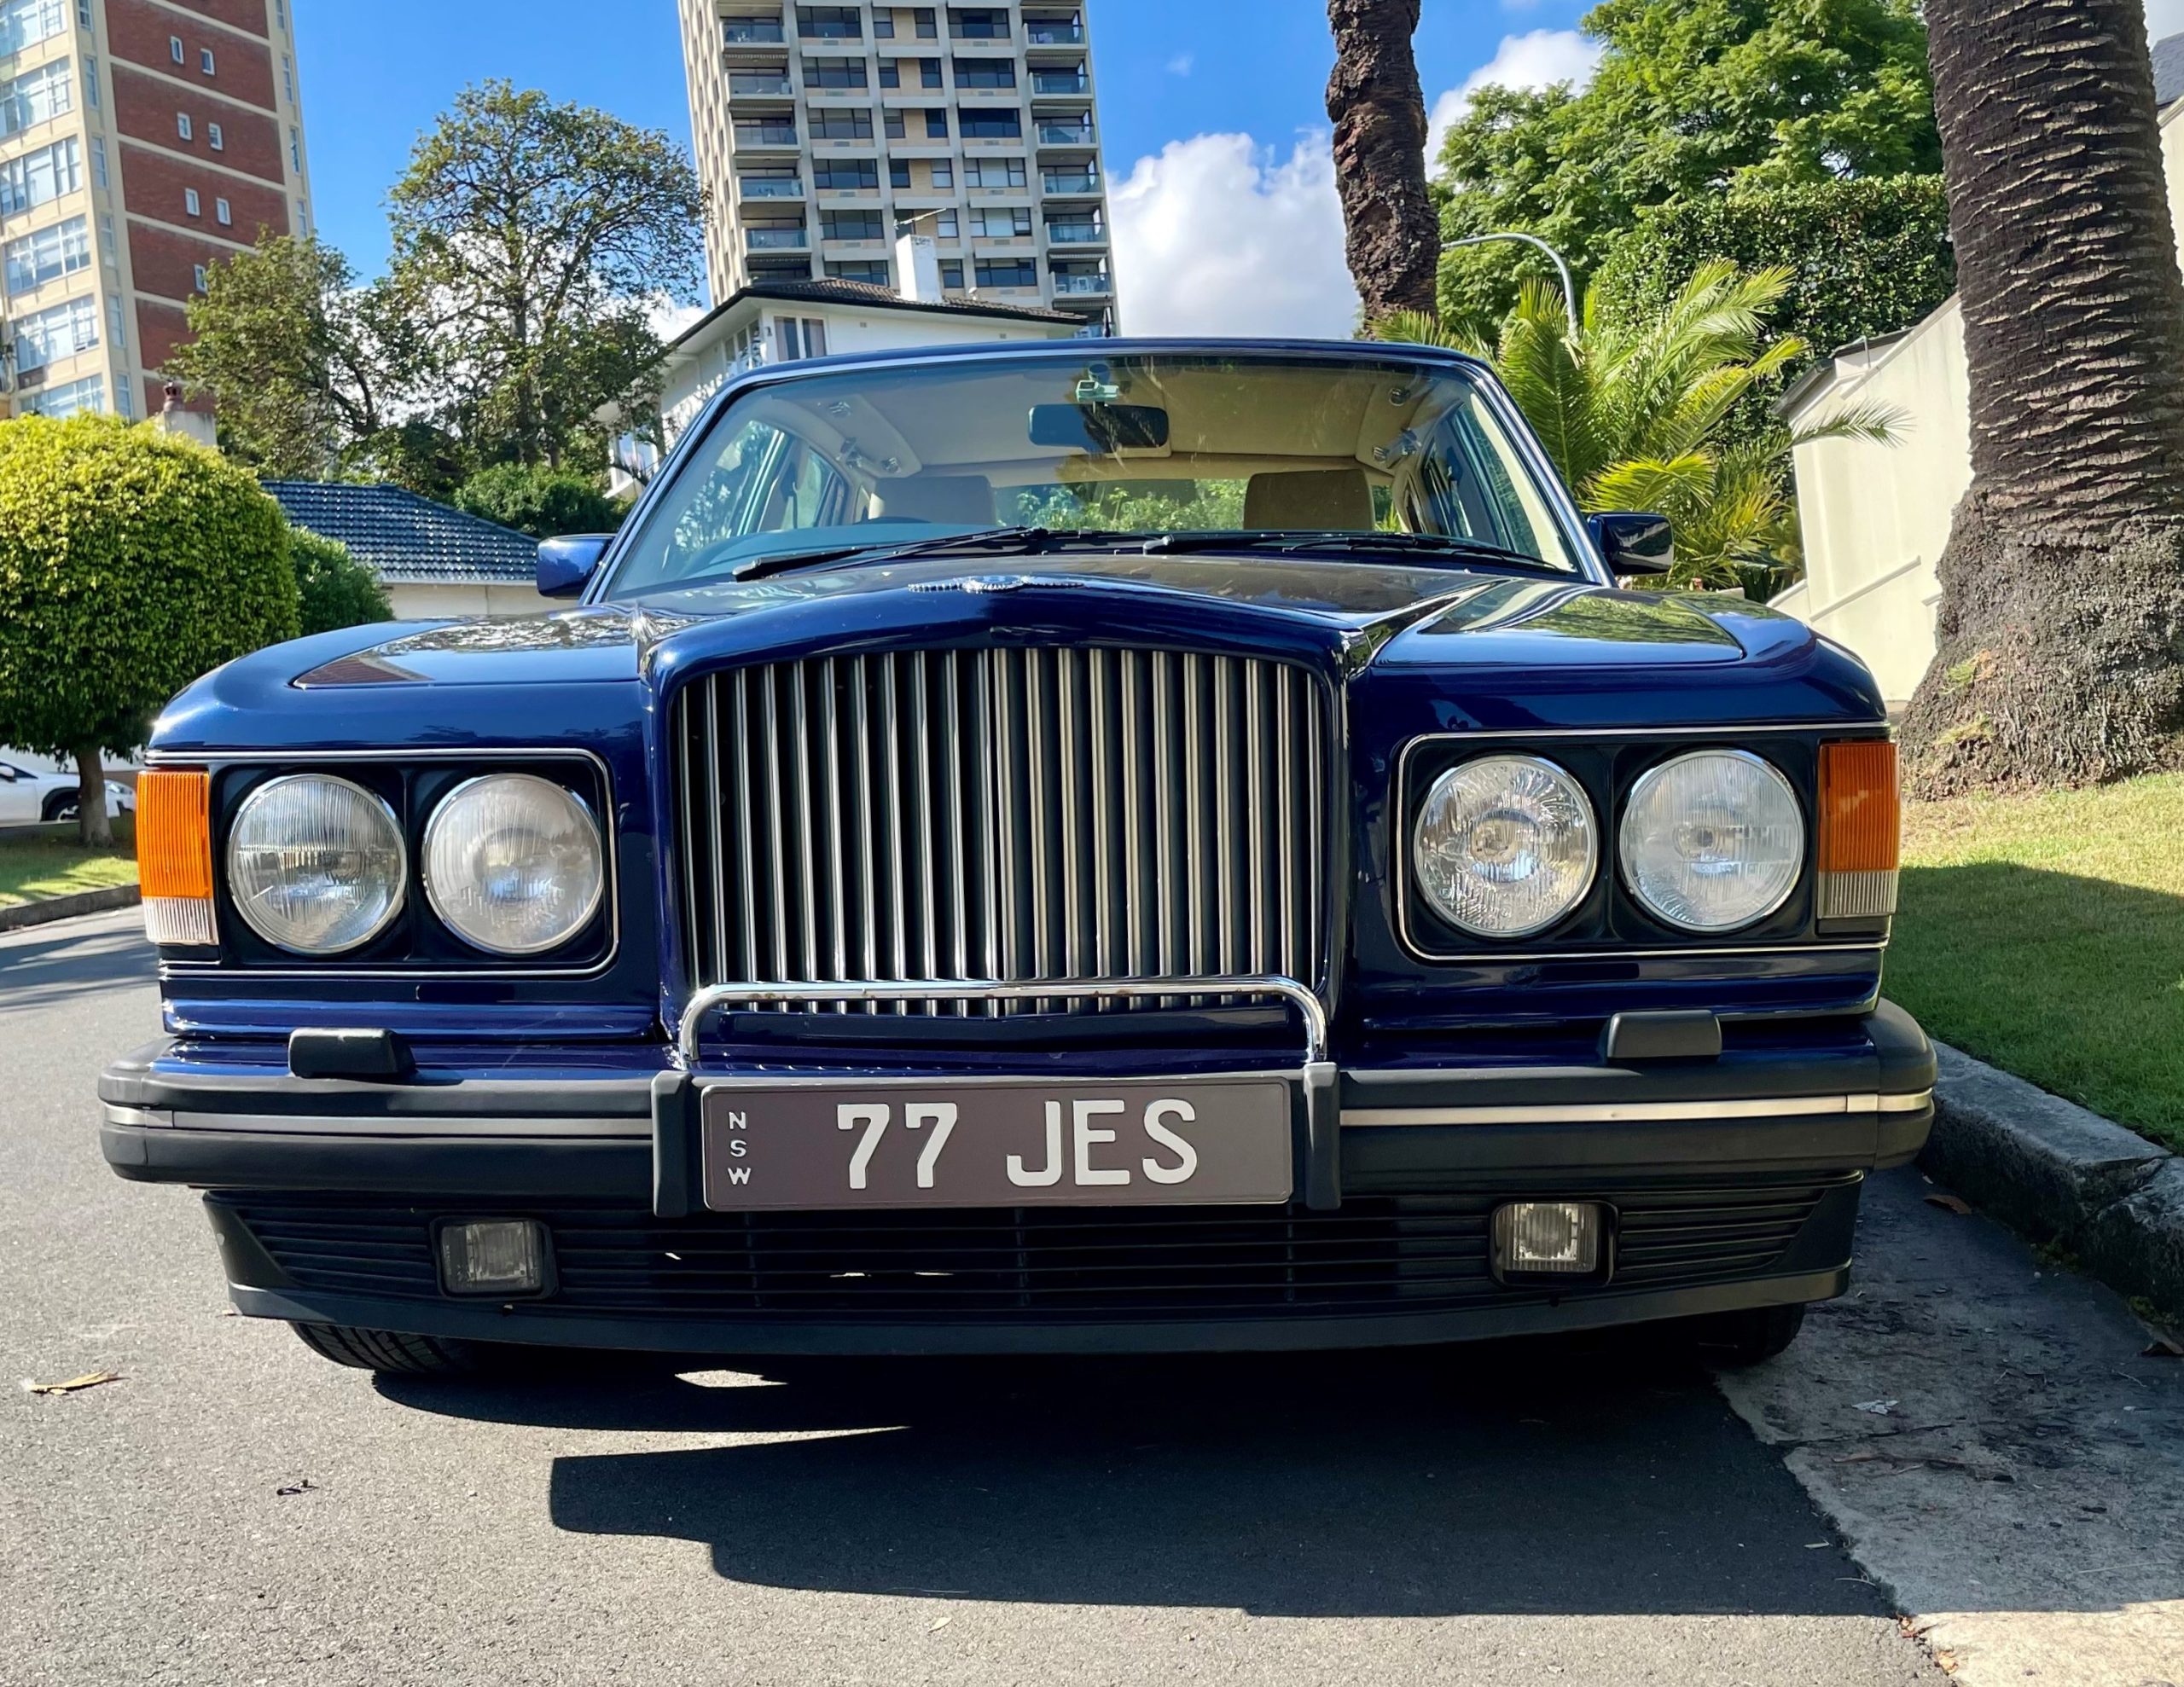 “Jess” – 1993 Bentley Brooklands. From $490 per day